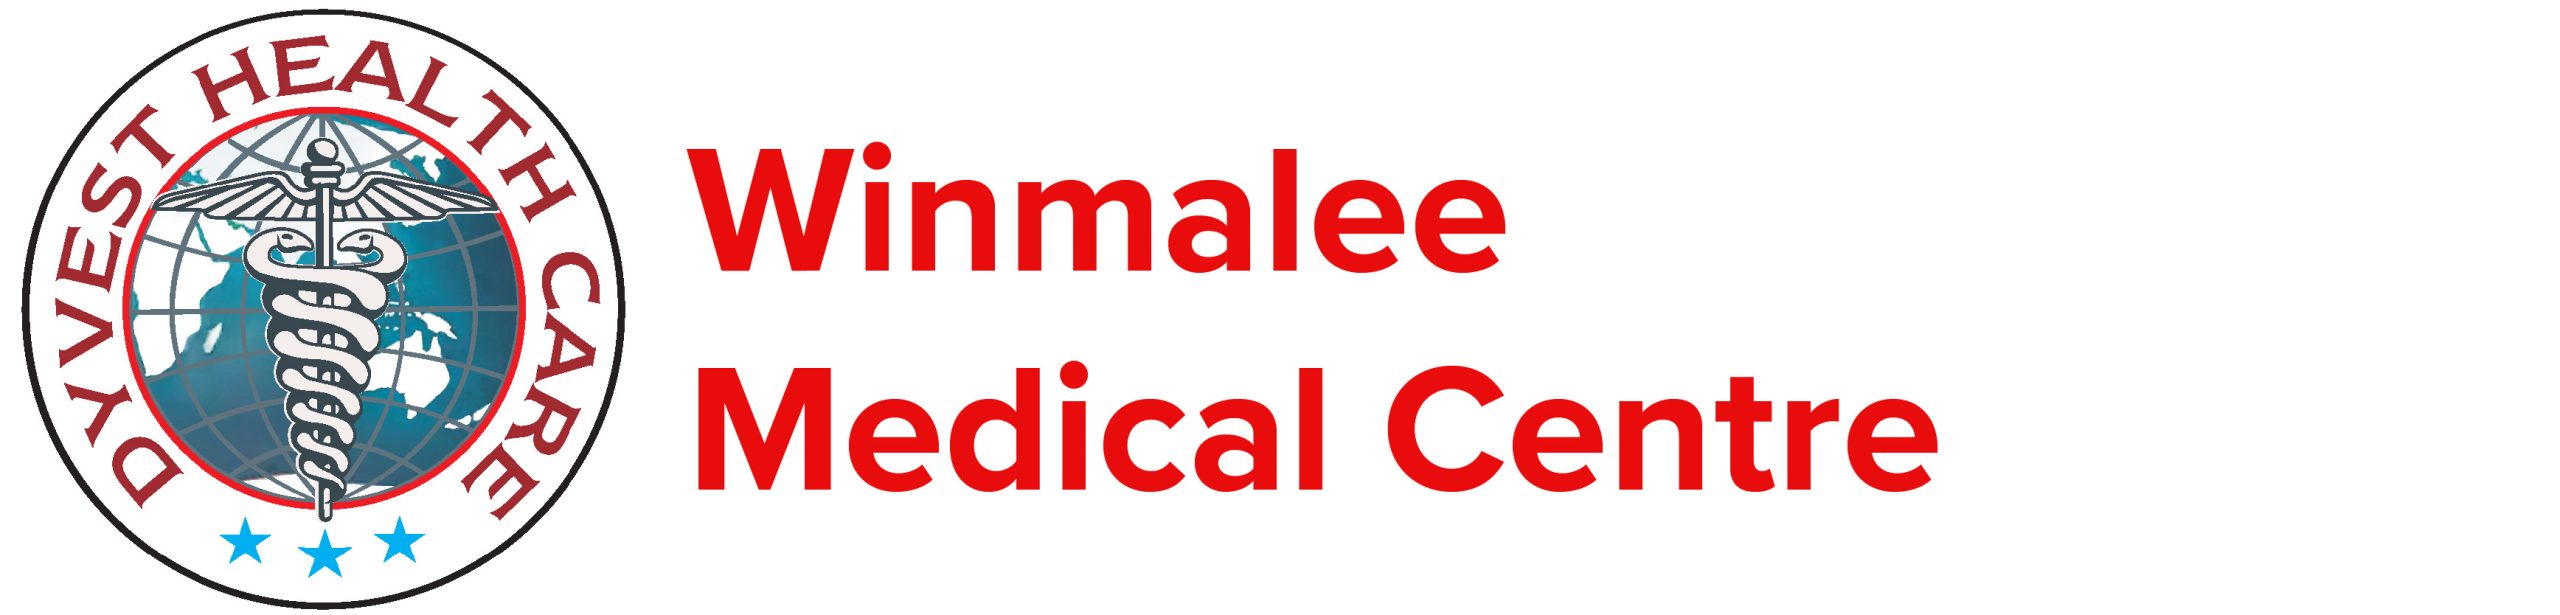 Winmalee Medical Centre Logo